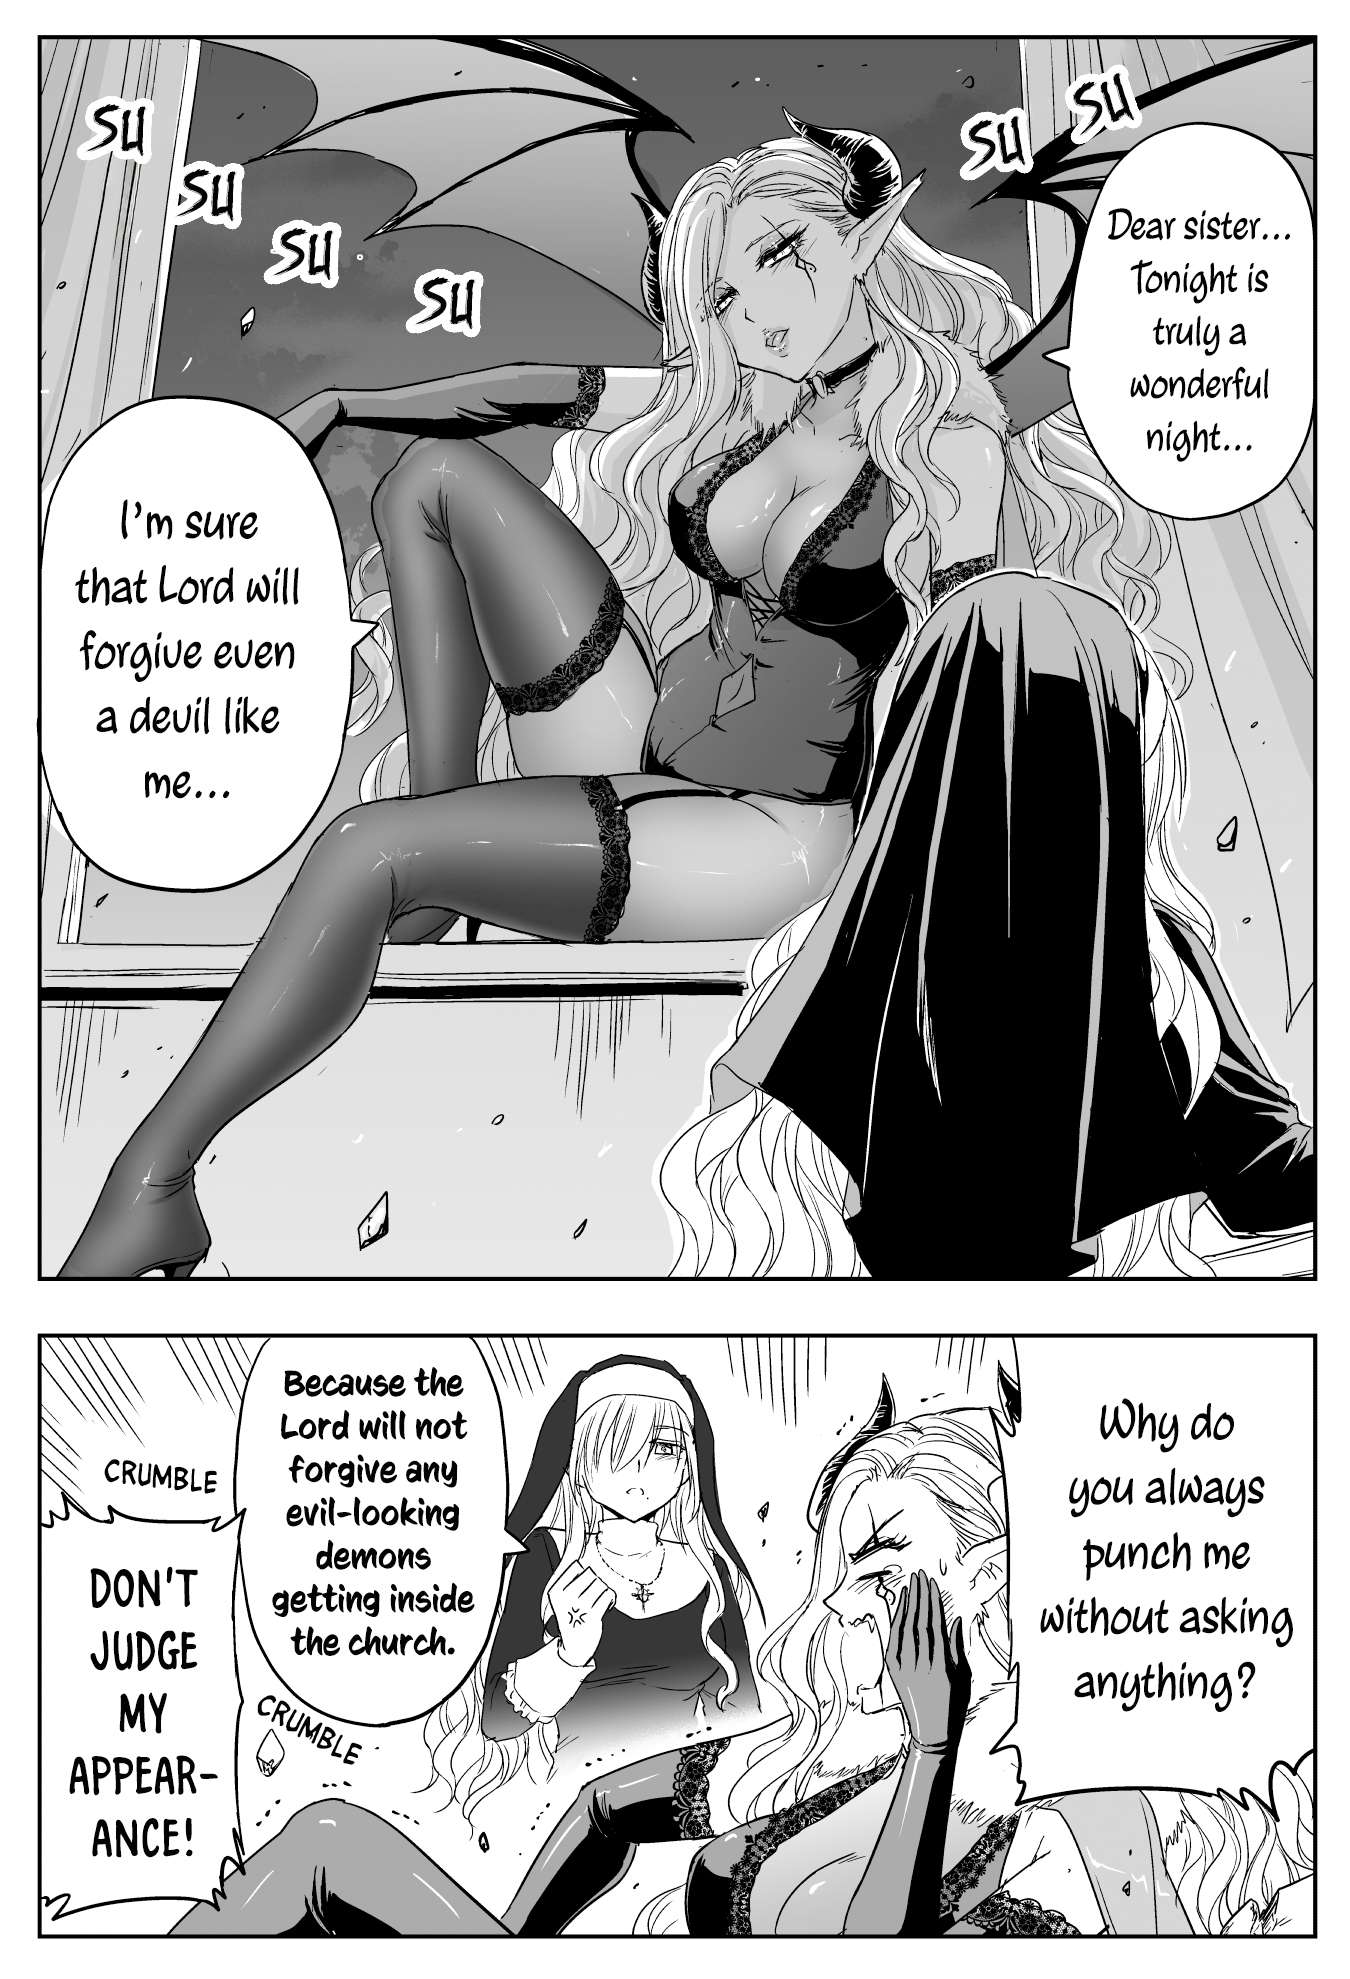 The Sister With Strength - chapter 32 - #2